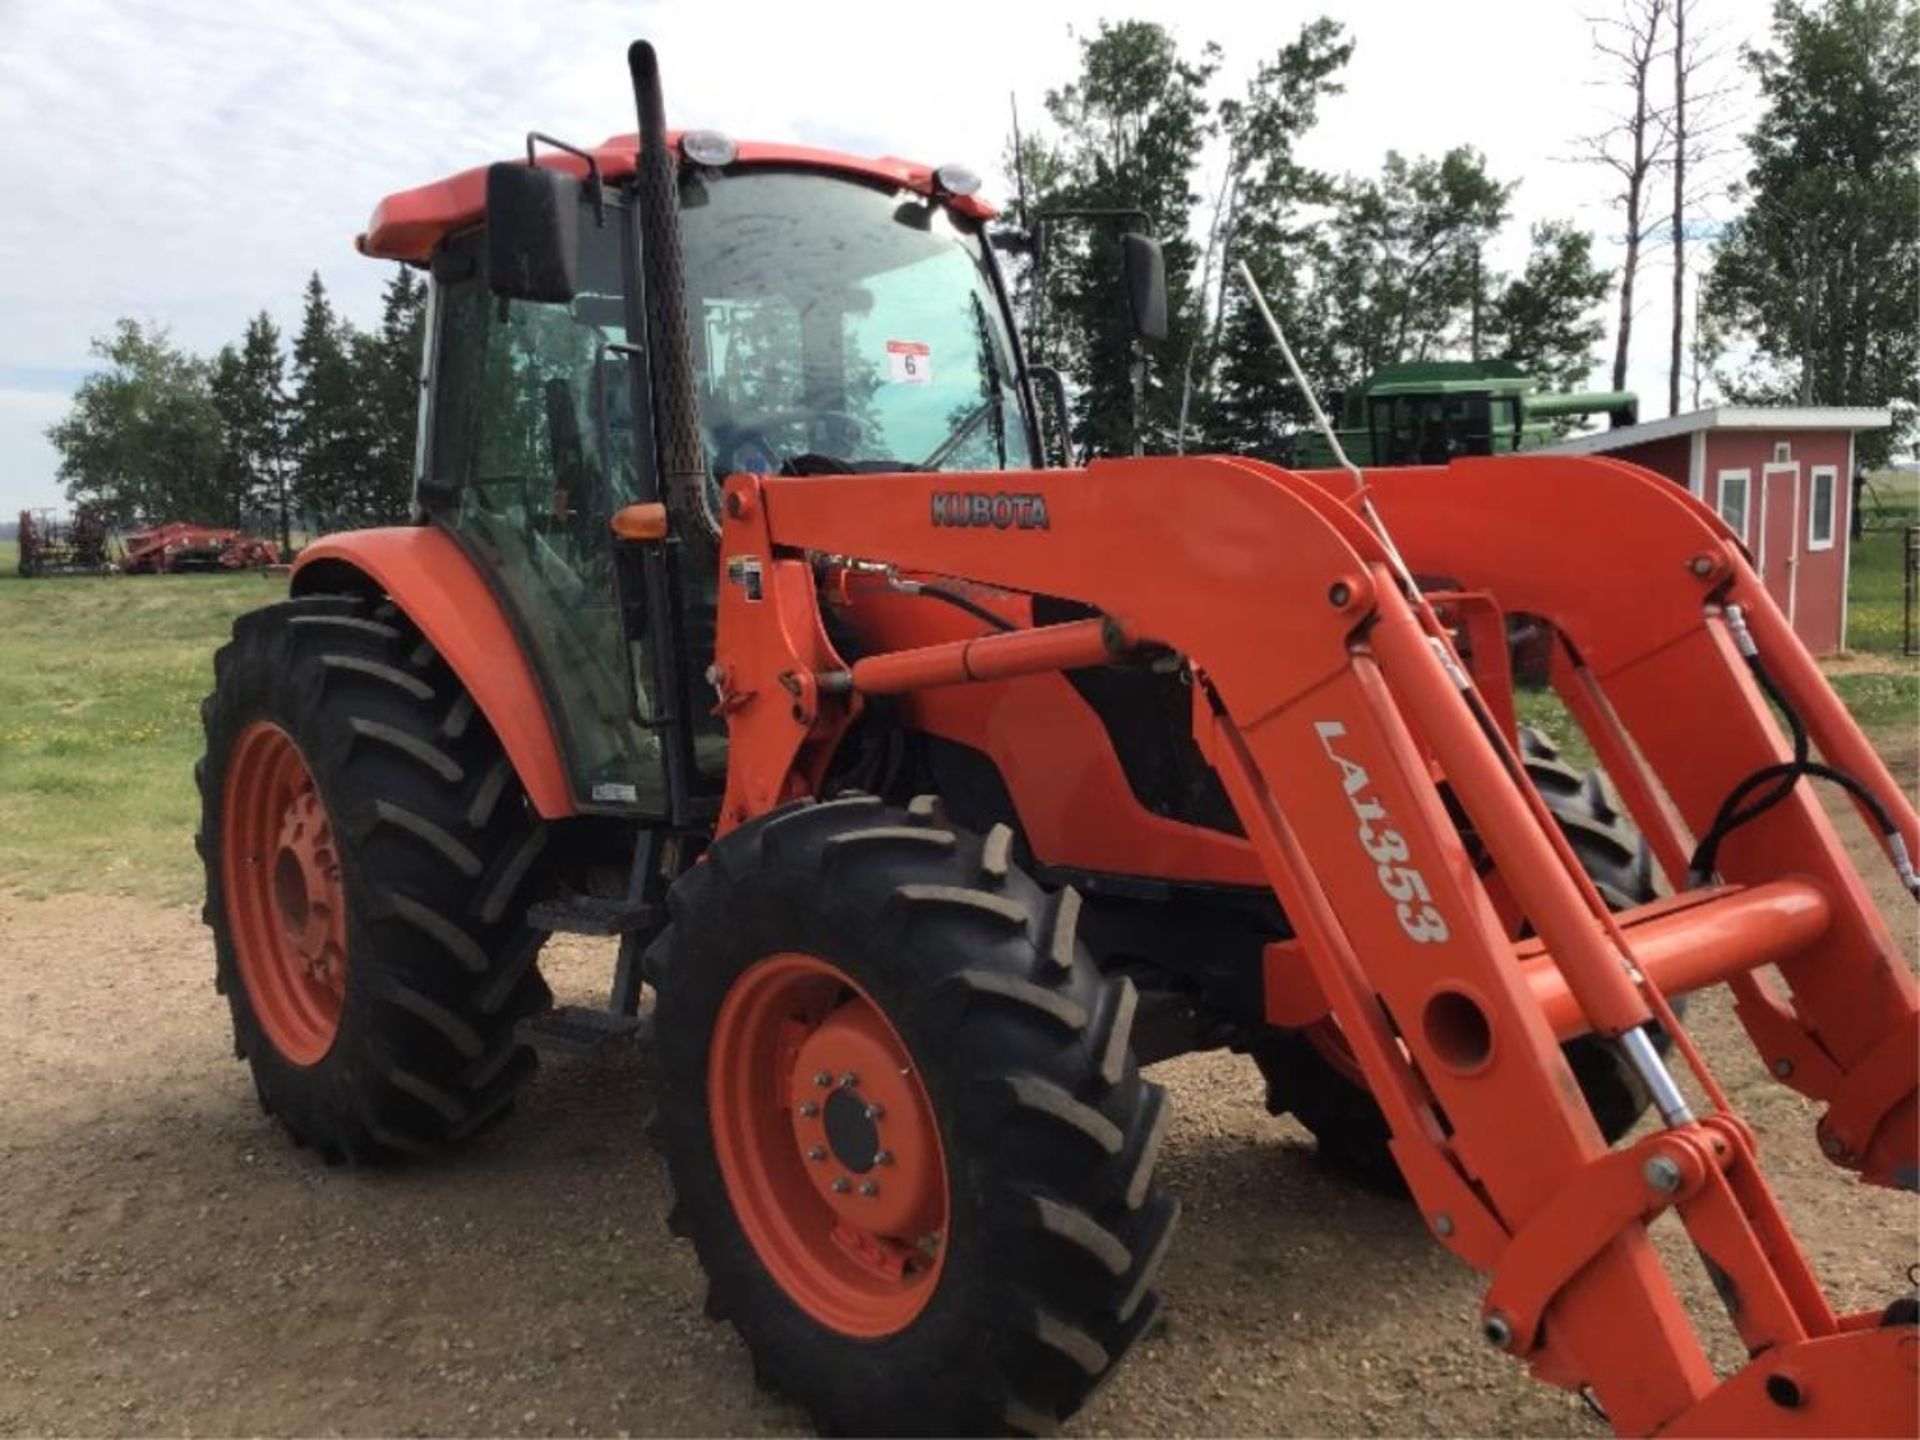 2011 M9540 Kubota Tractor W/ LA353 Front End Loader & Bucket, 2 Forks(may sell sepesrate), 1104 - Image 3 of 12